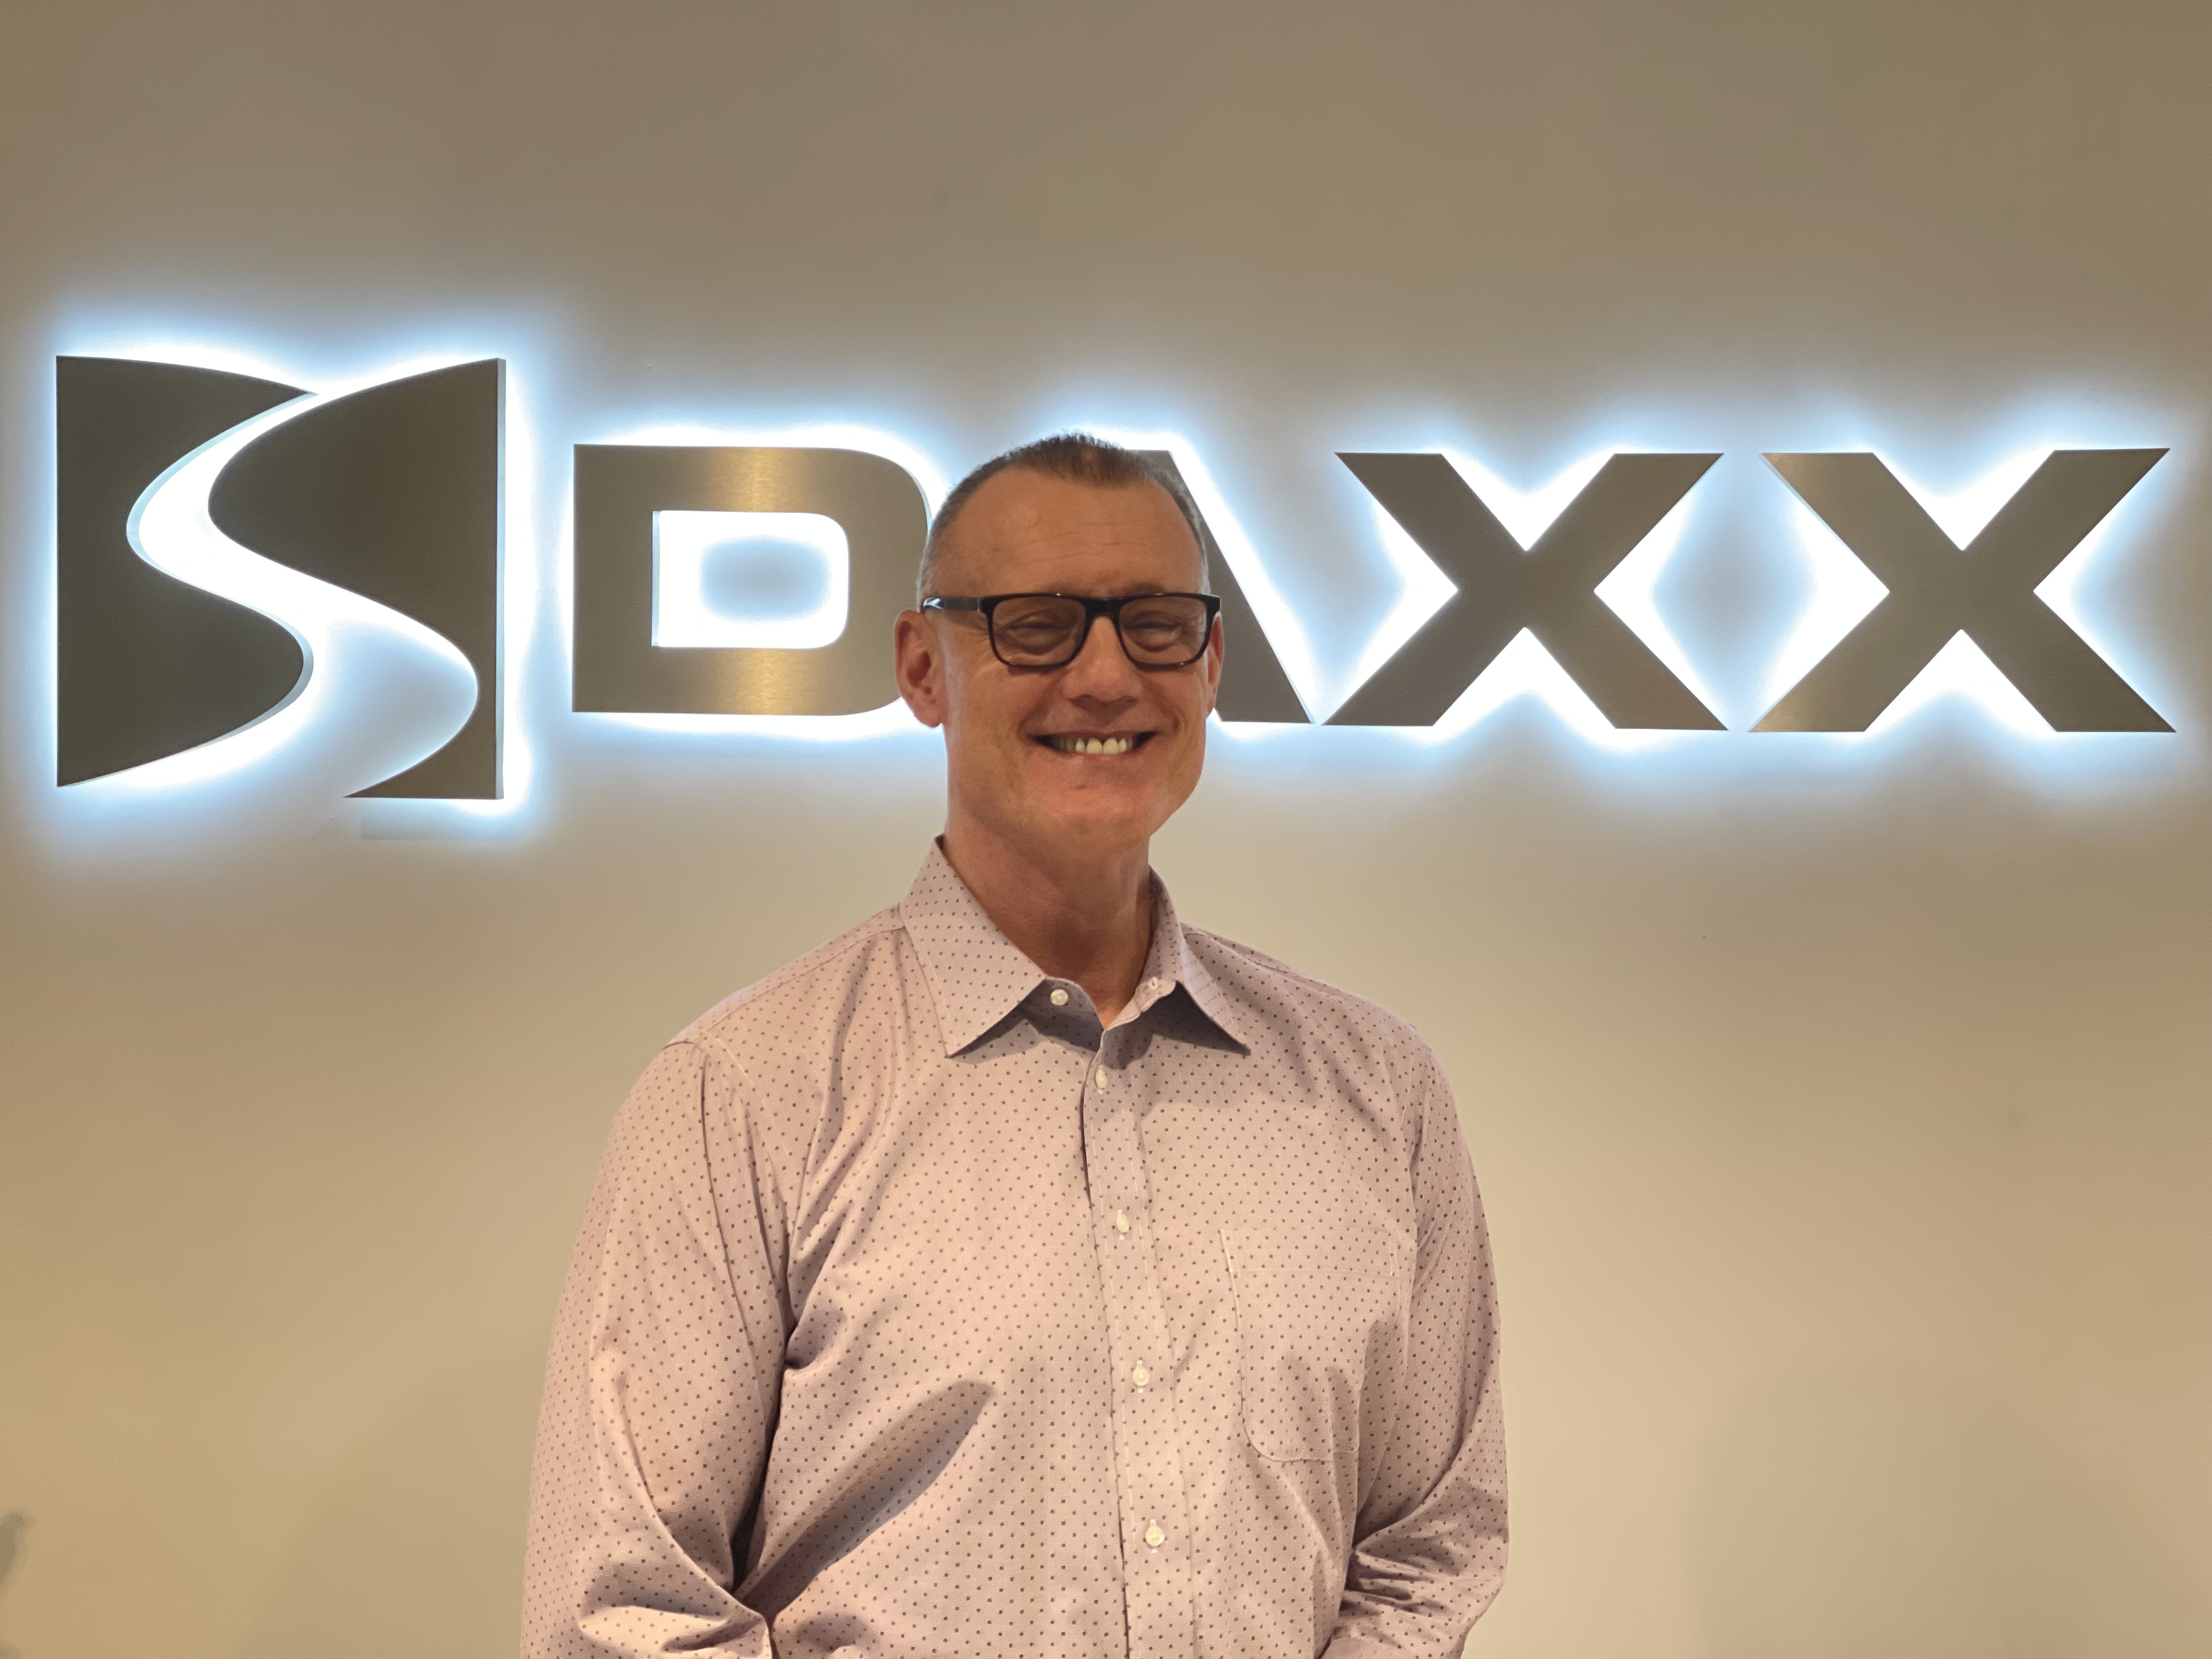 DAXX Introduces New Vice President of Sales and Distribution